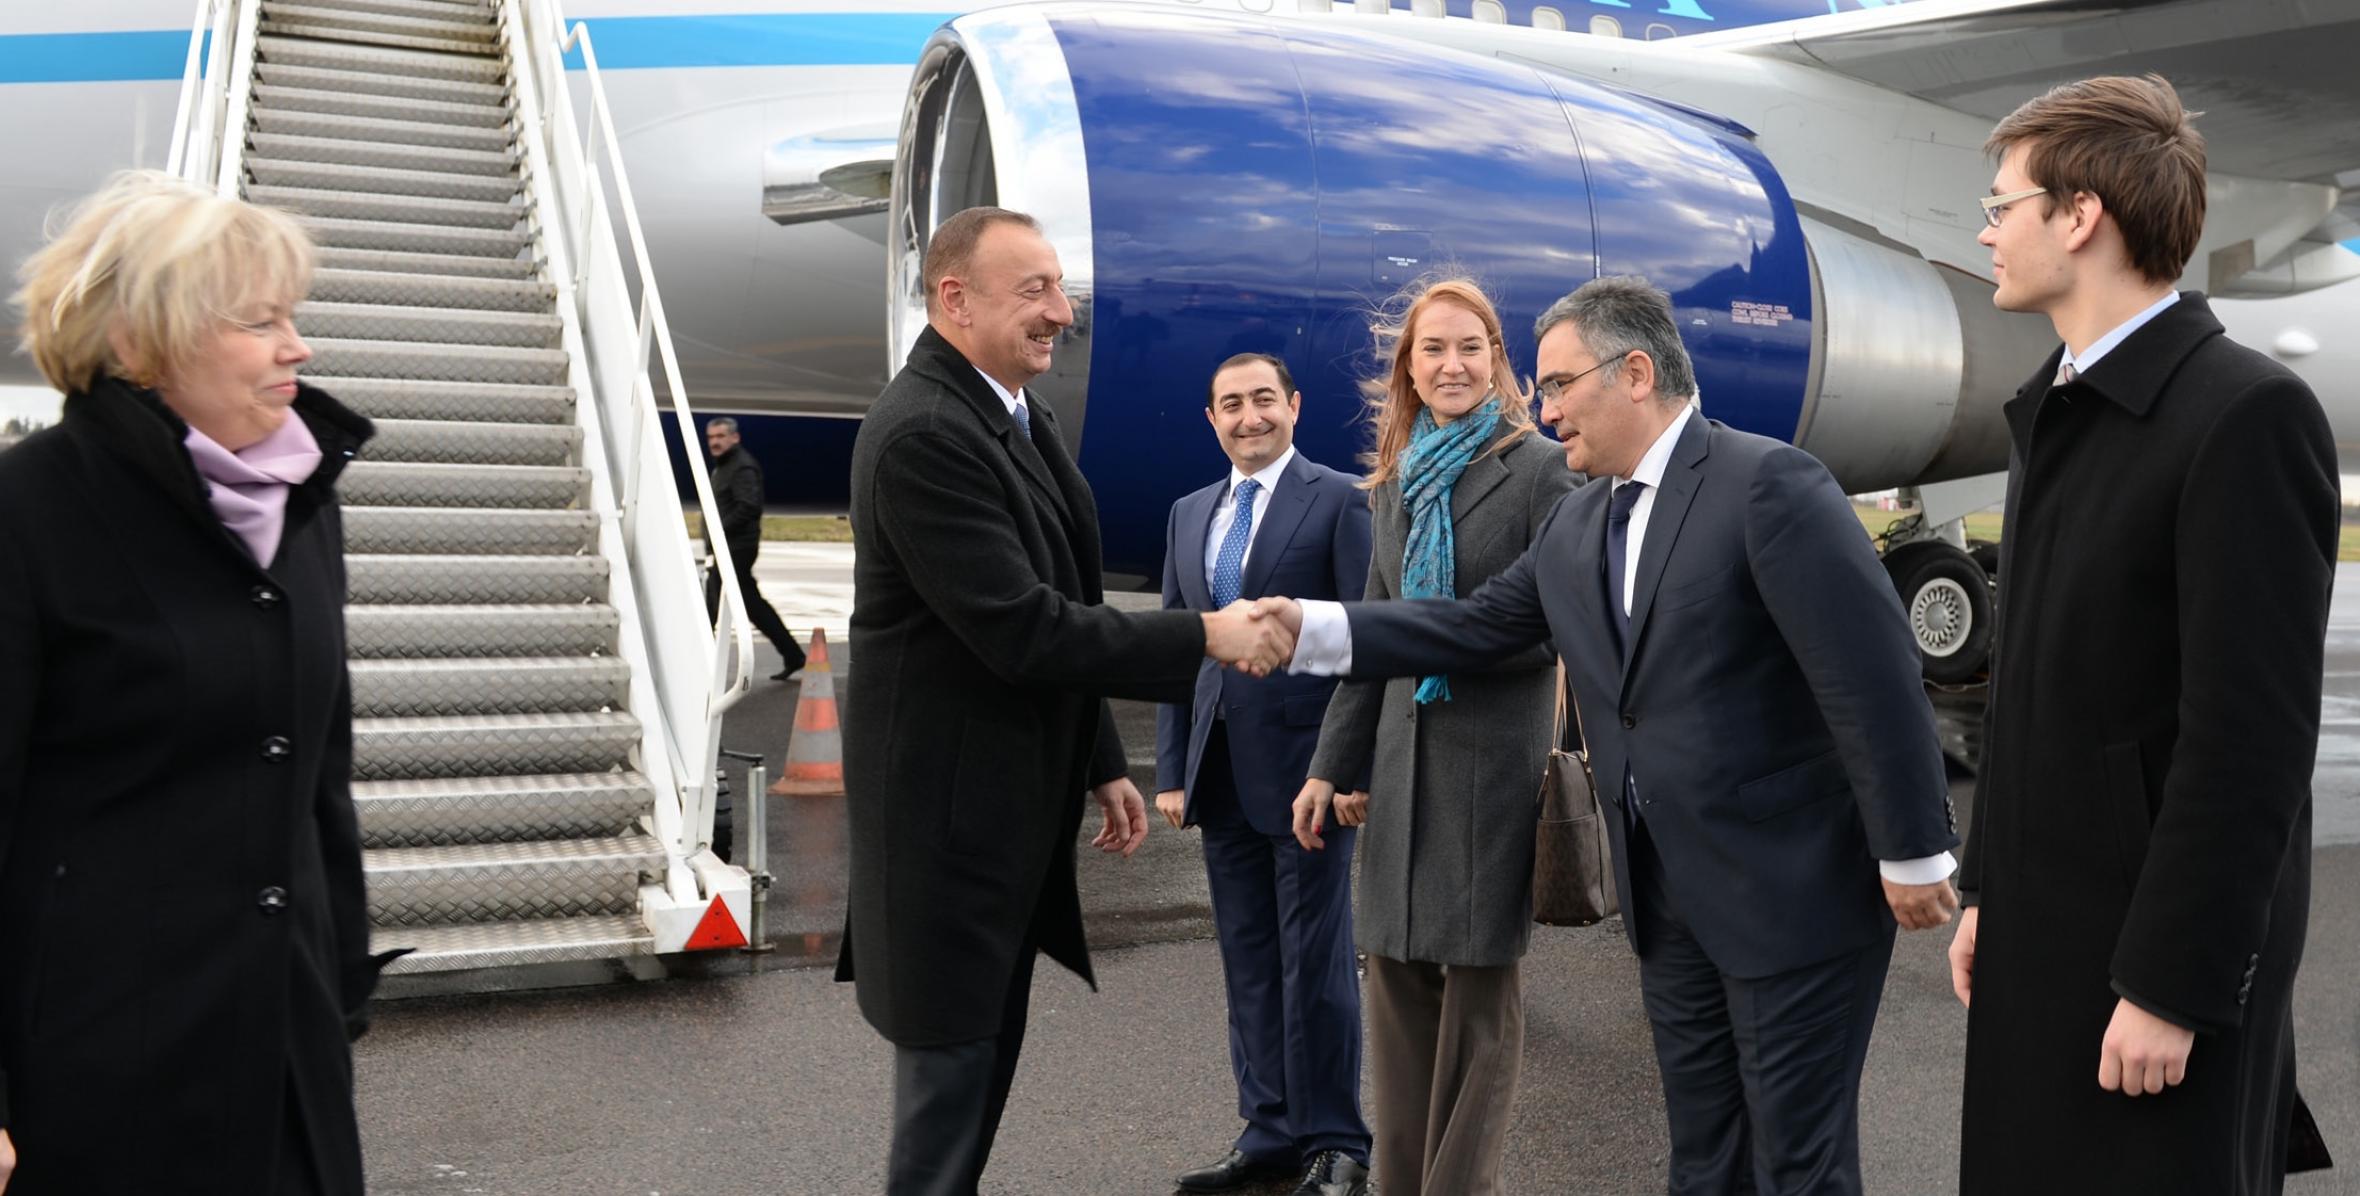 Ilham Aliyev has arrived in Lithuania on a working visit